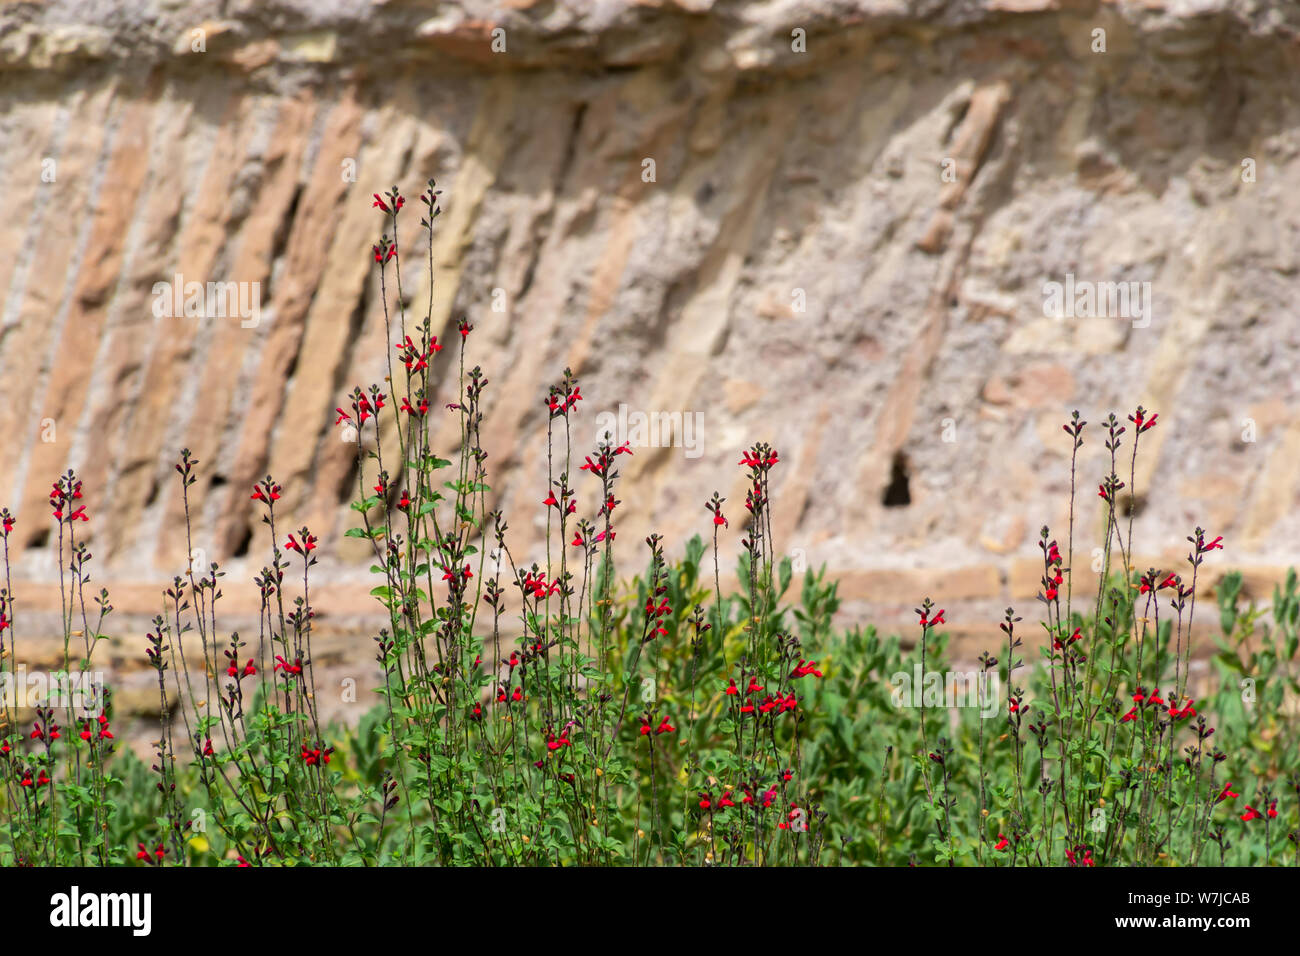 Scarlet flowering sage royal bumble or salvia x jamensis Reve Rouge blooming in Italy in the summertime. Stock Photo